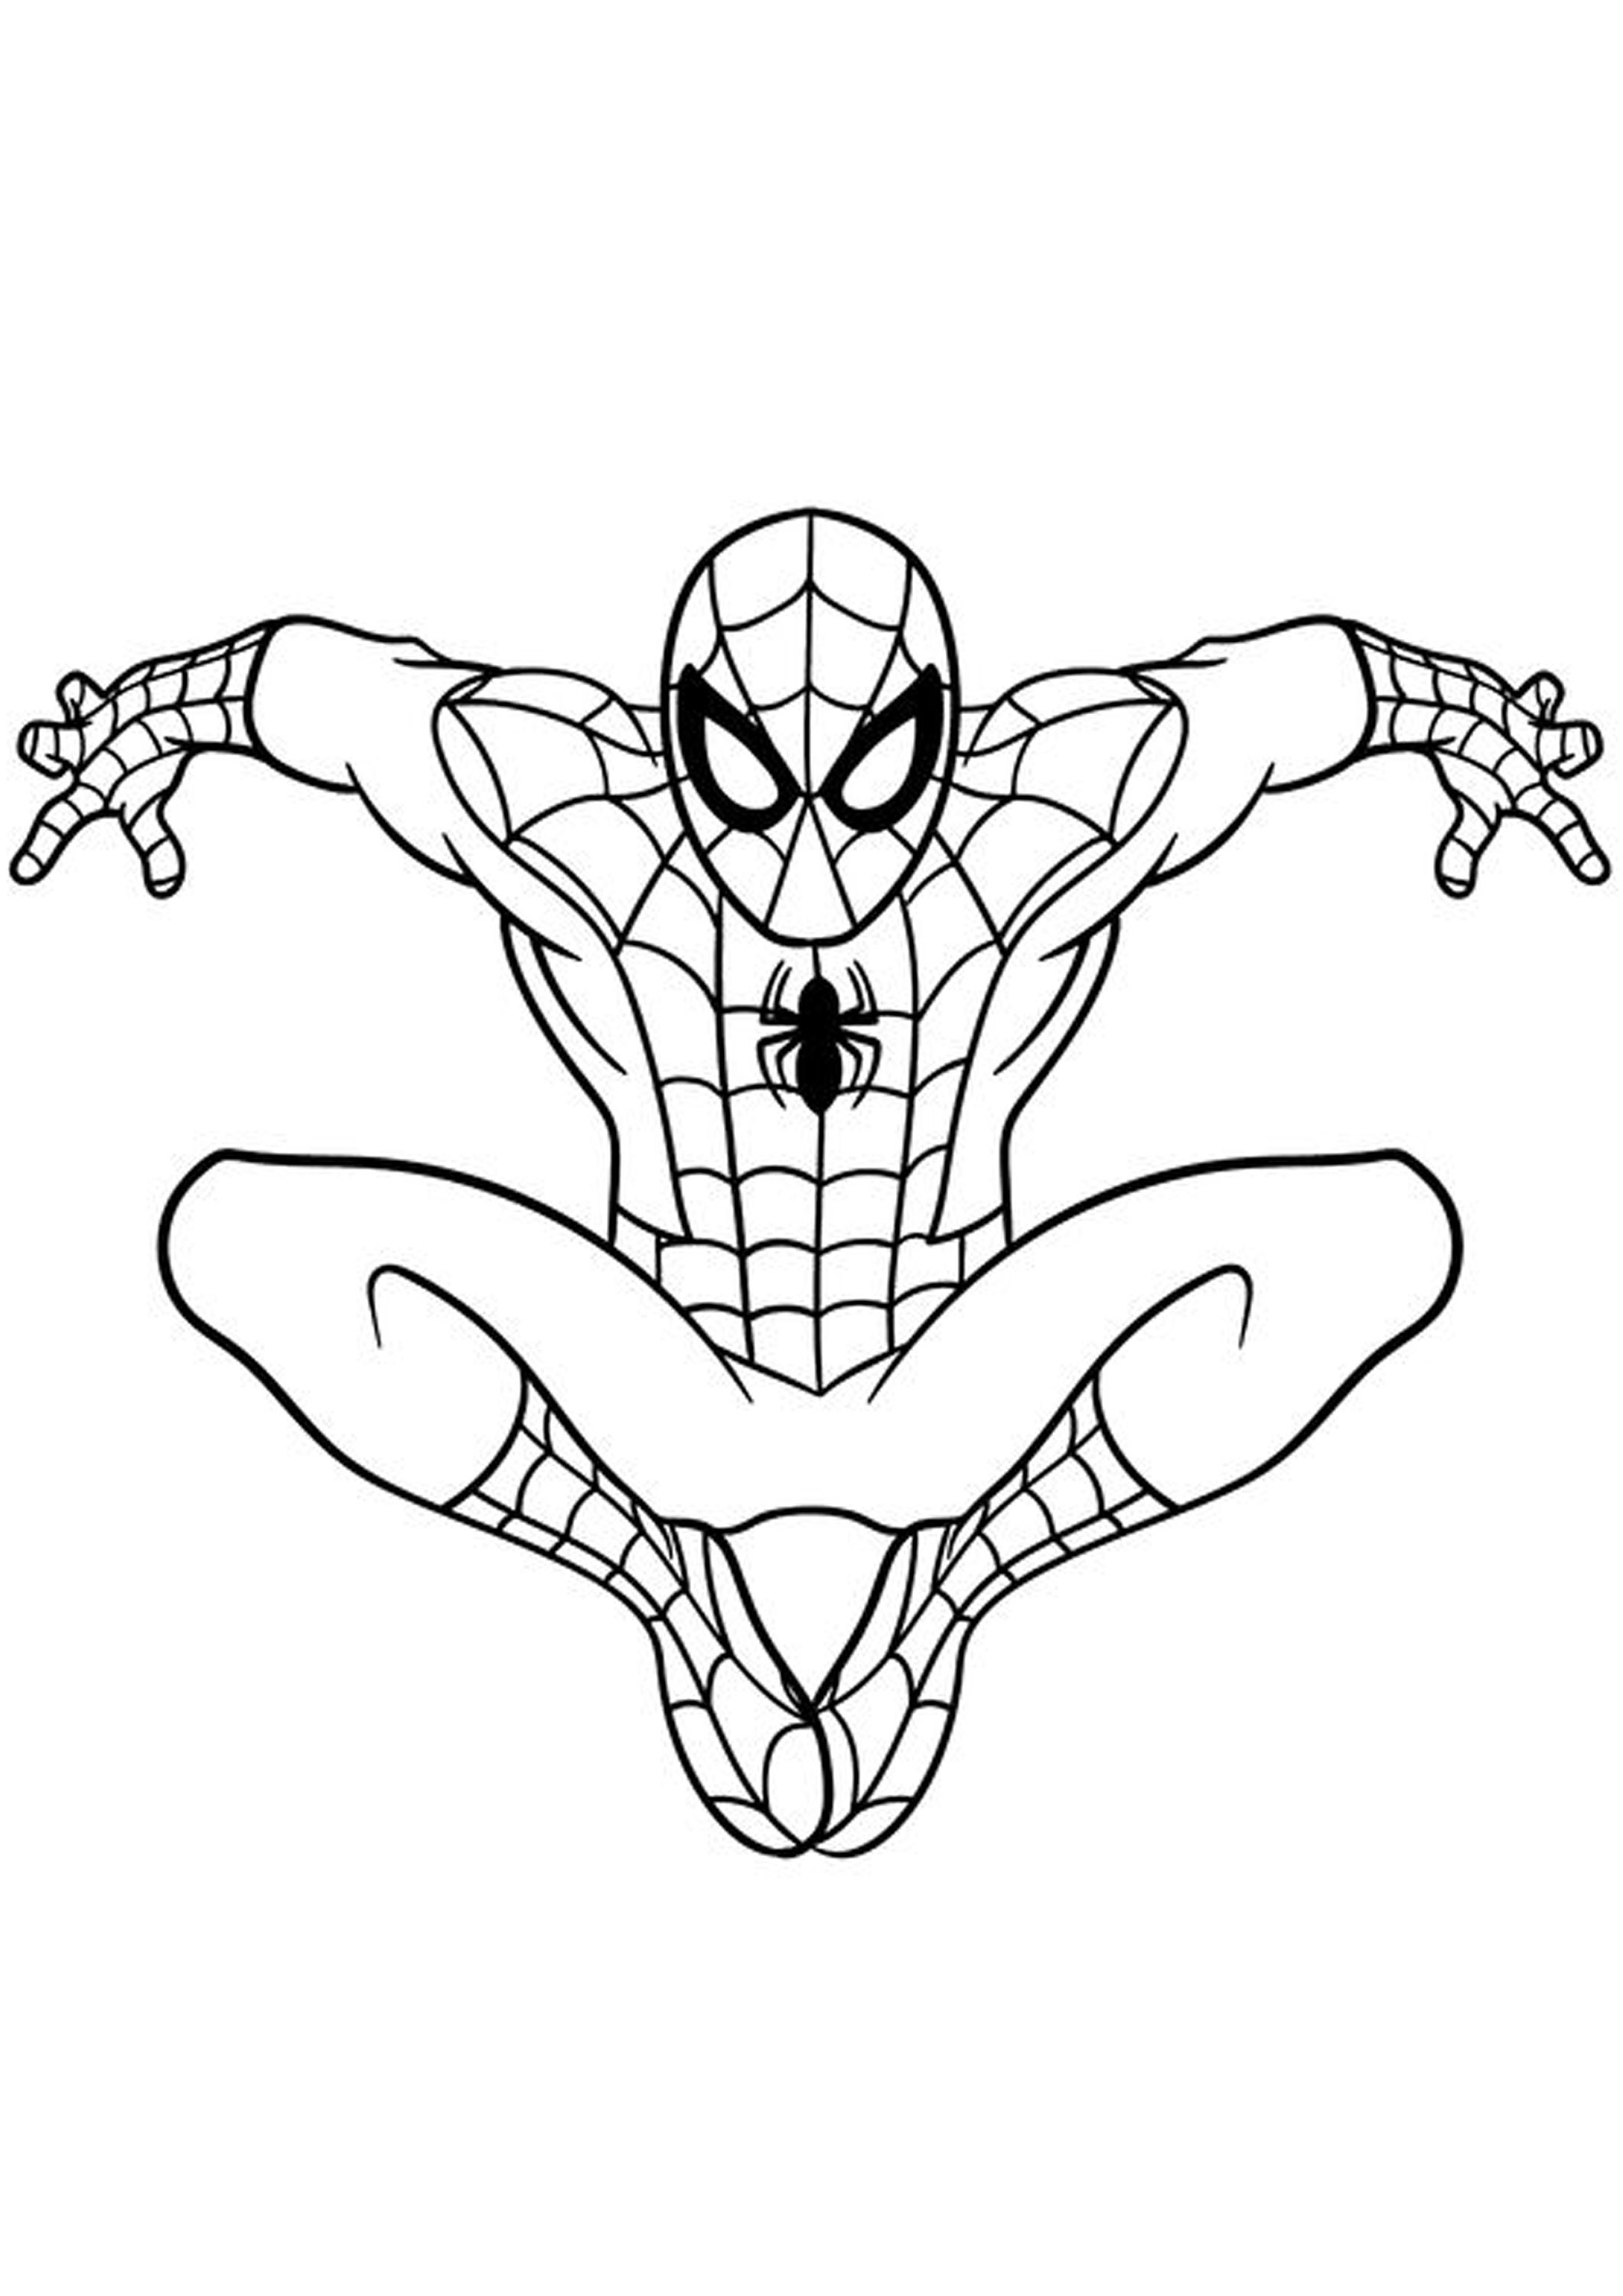 Spiderman Coloring Pages Pdf 20 Coloring Pages for Kids Best - Etsy